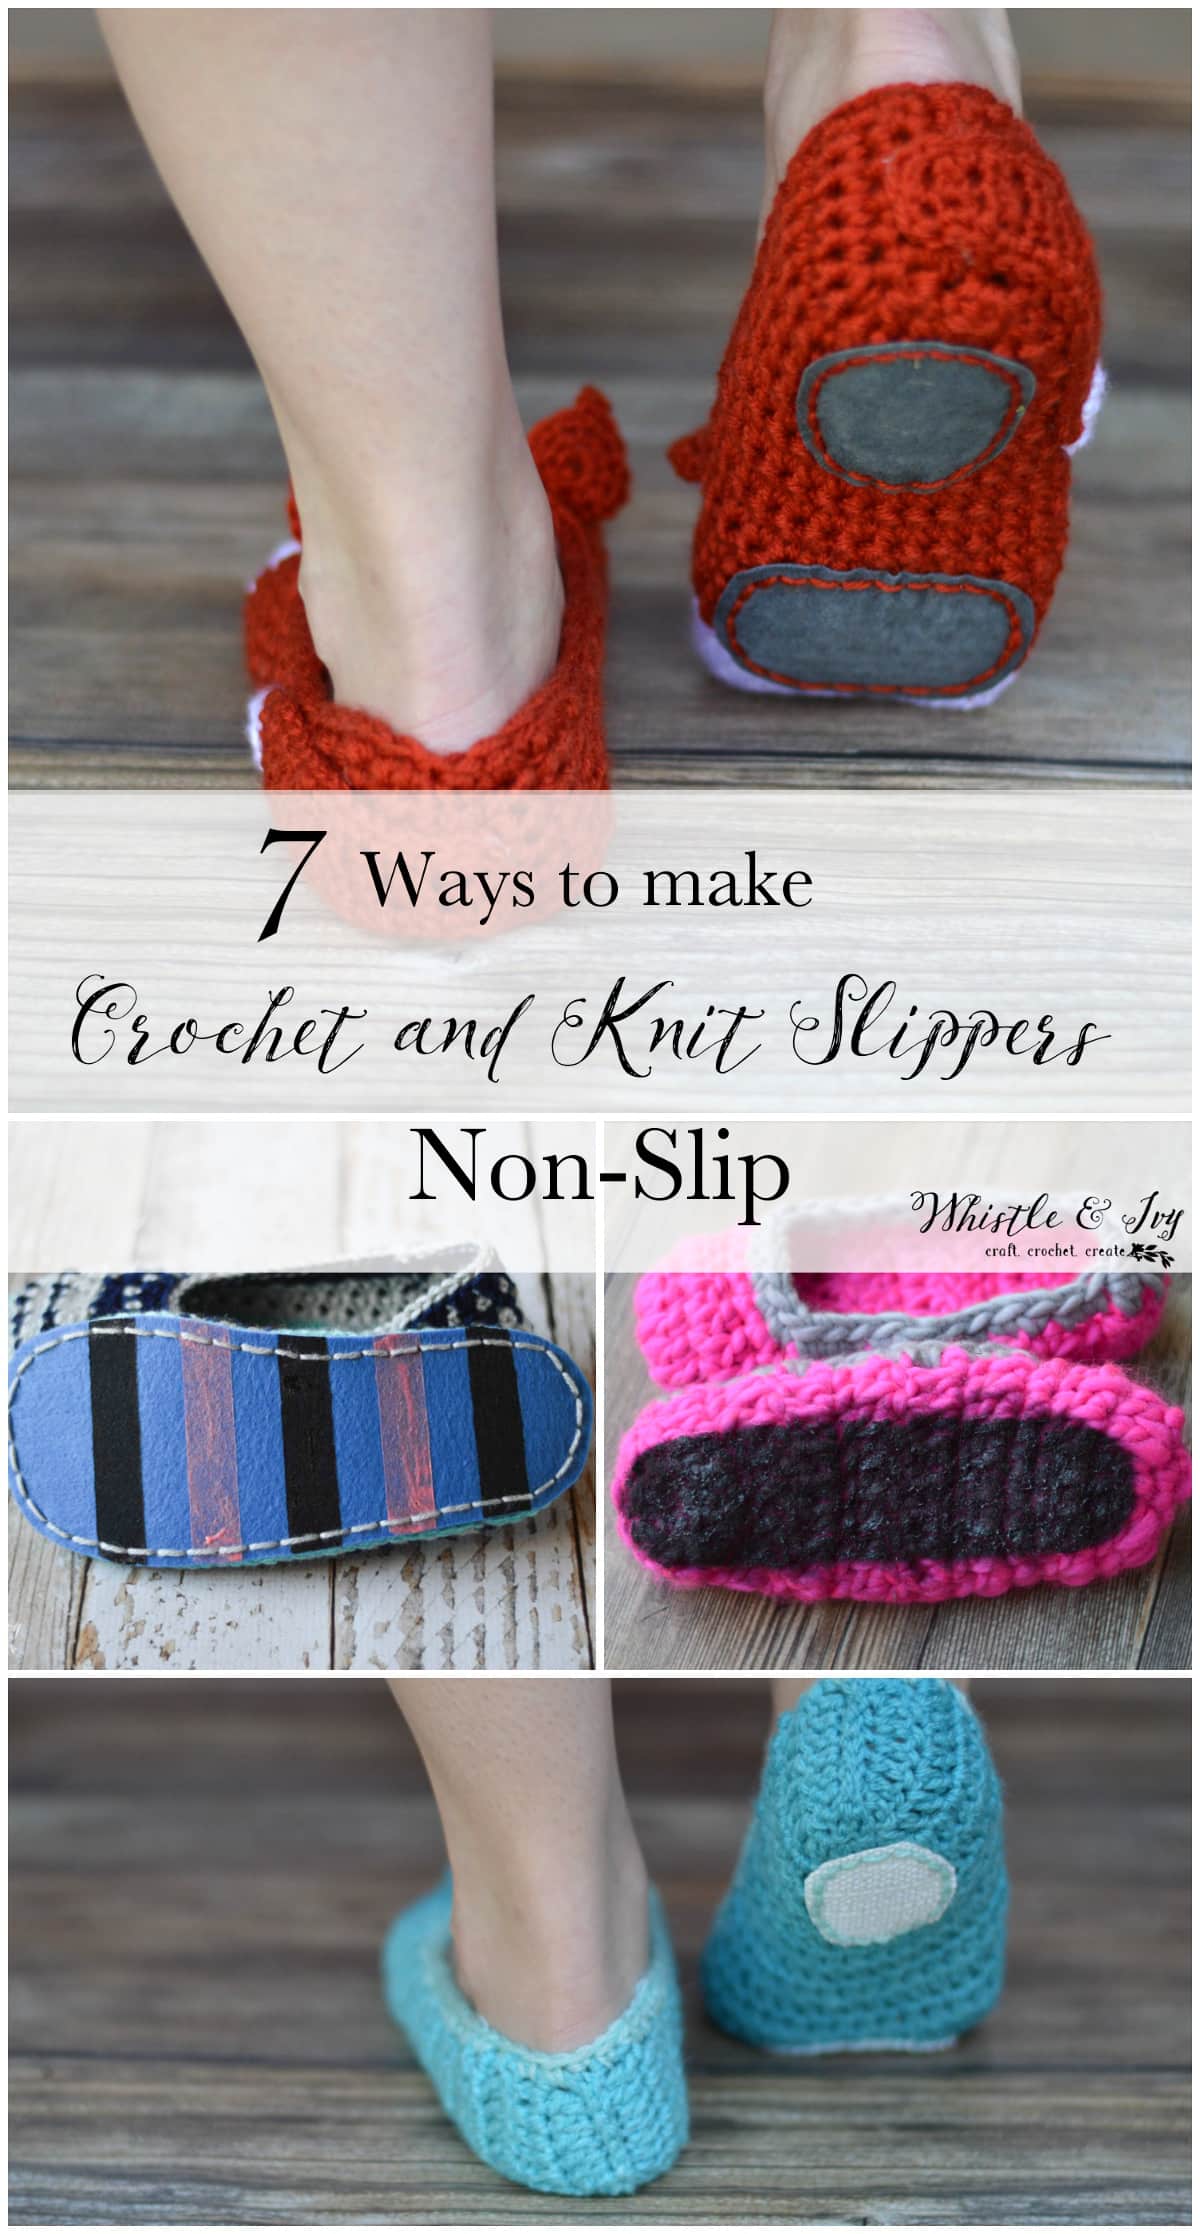 How to Make Knit and Crochet Slippers Non-Slip – 7 Tried and Tested Non-Slip Methods